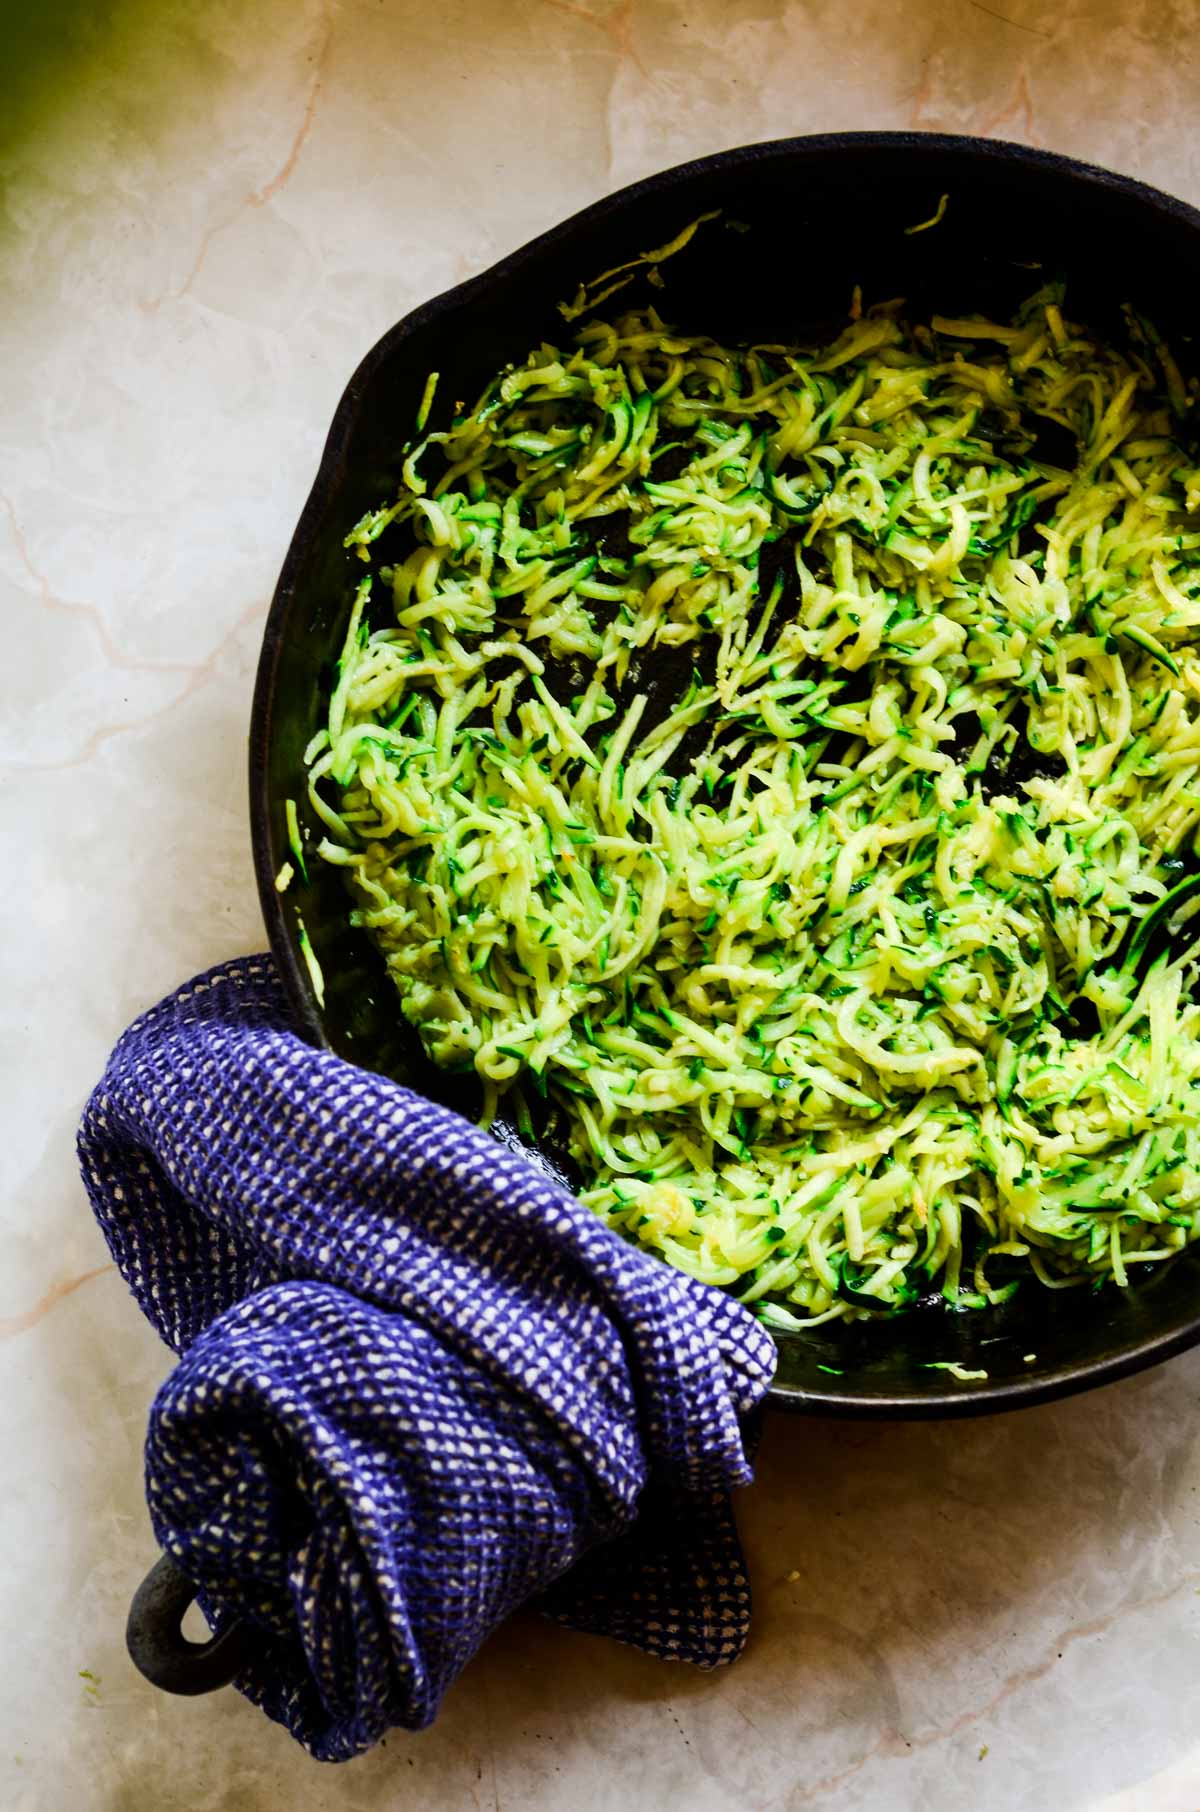 Shredded zucchini in a cast iron frying pan.